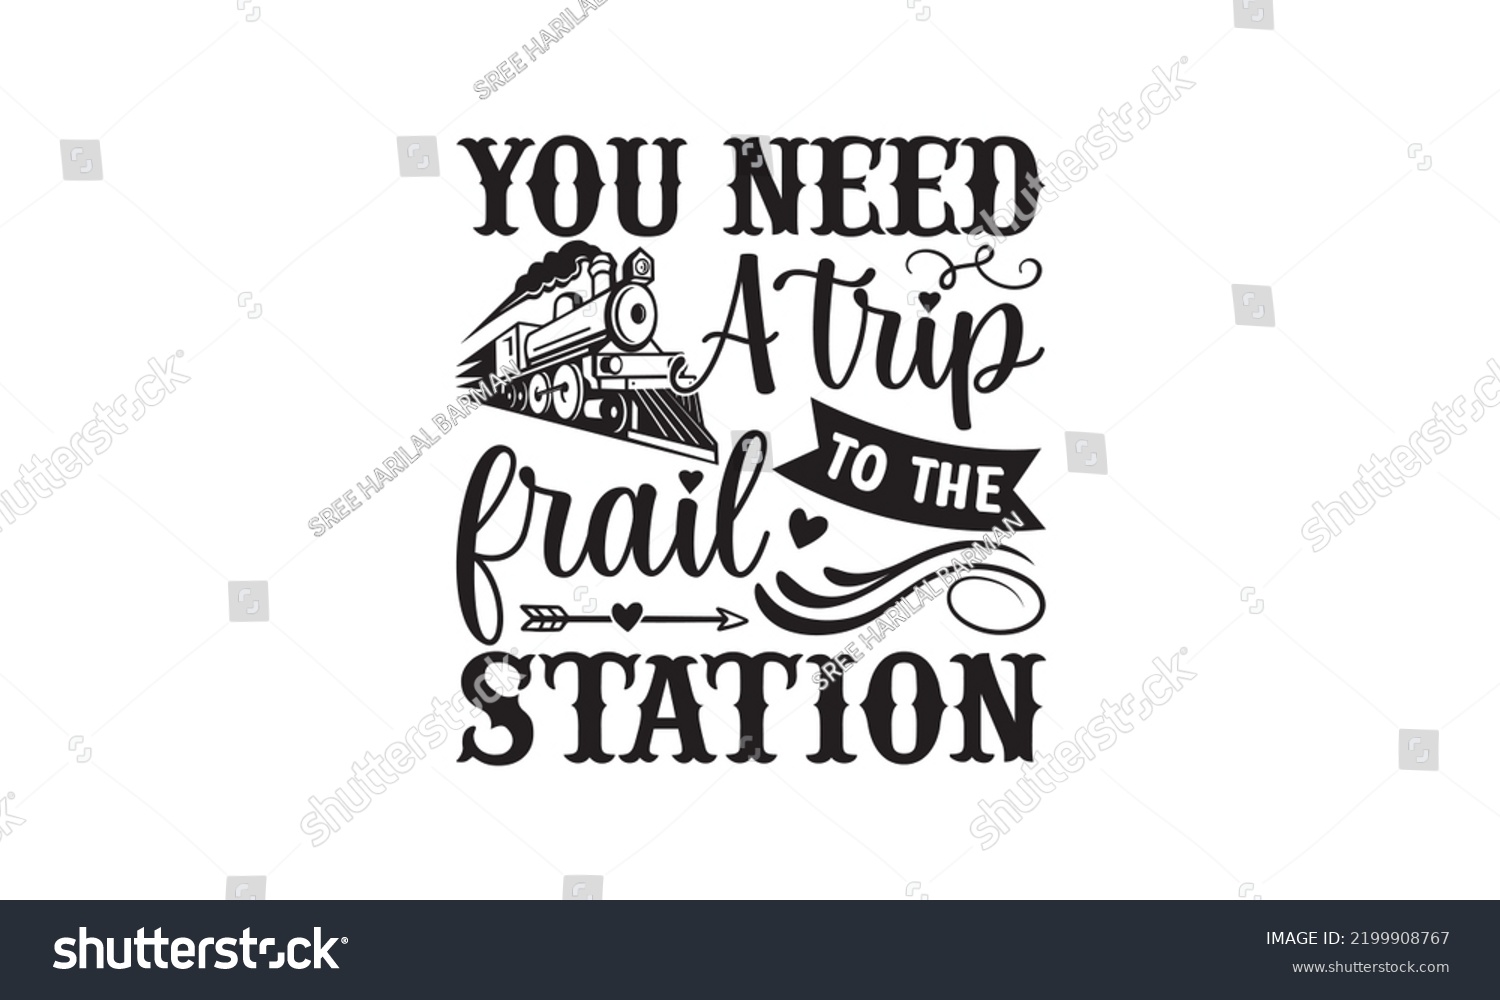 SVG of You need a trip to the frail station - Train SVG t-shirt design, Hand drew lettering phrases, templet, Calligraphy graphic design, SVG Files for Cutting Cricut and Silhouette. Eps 10 svg